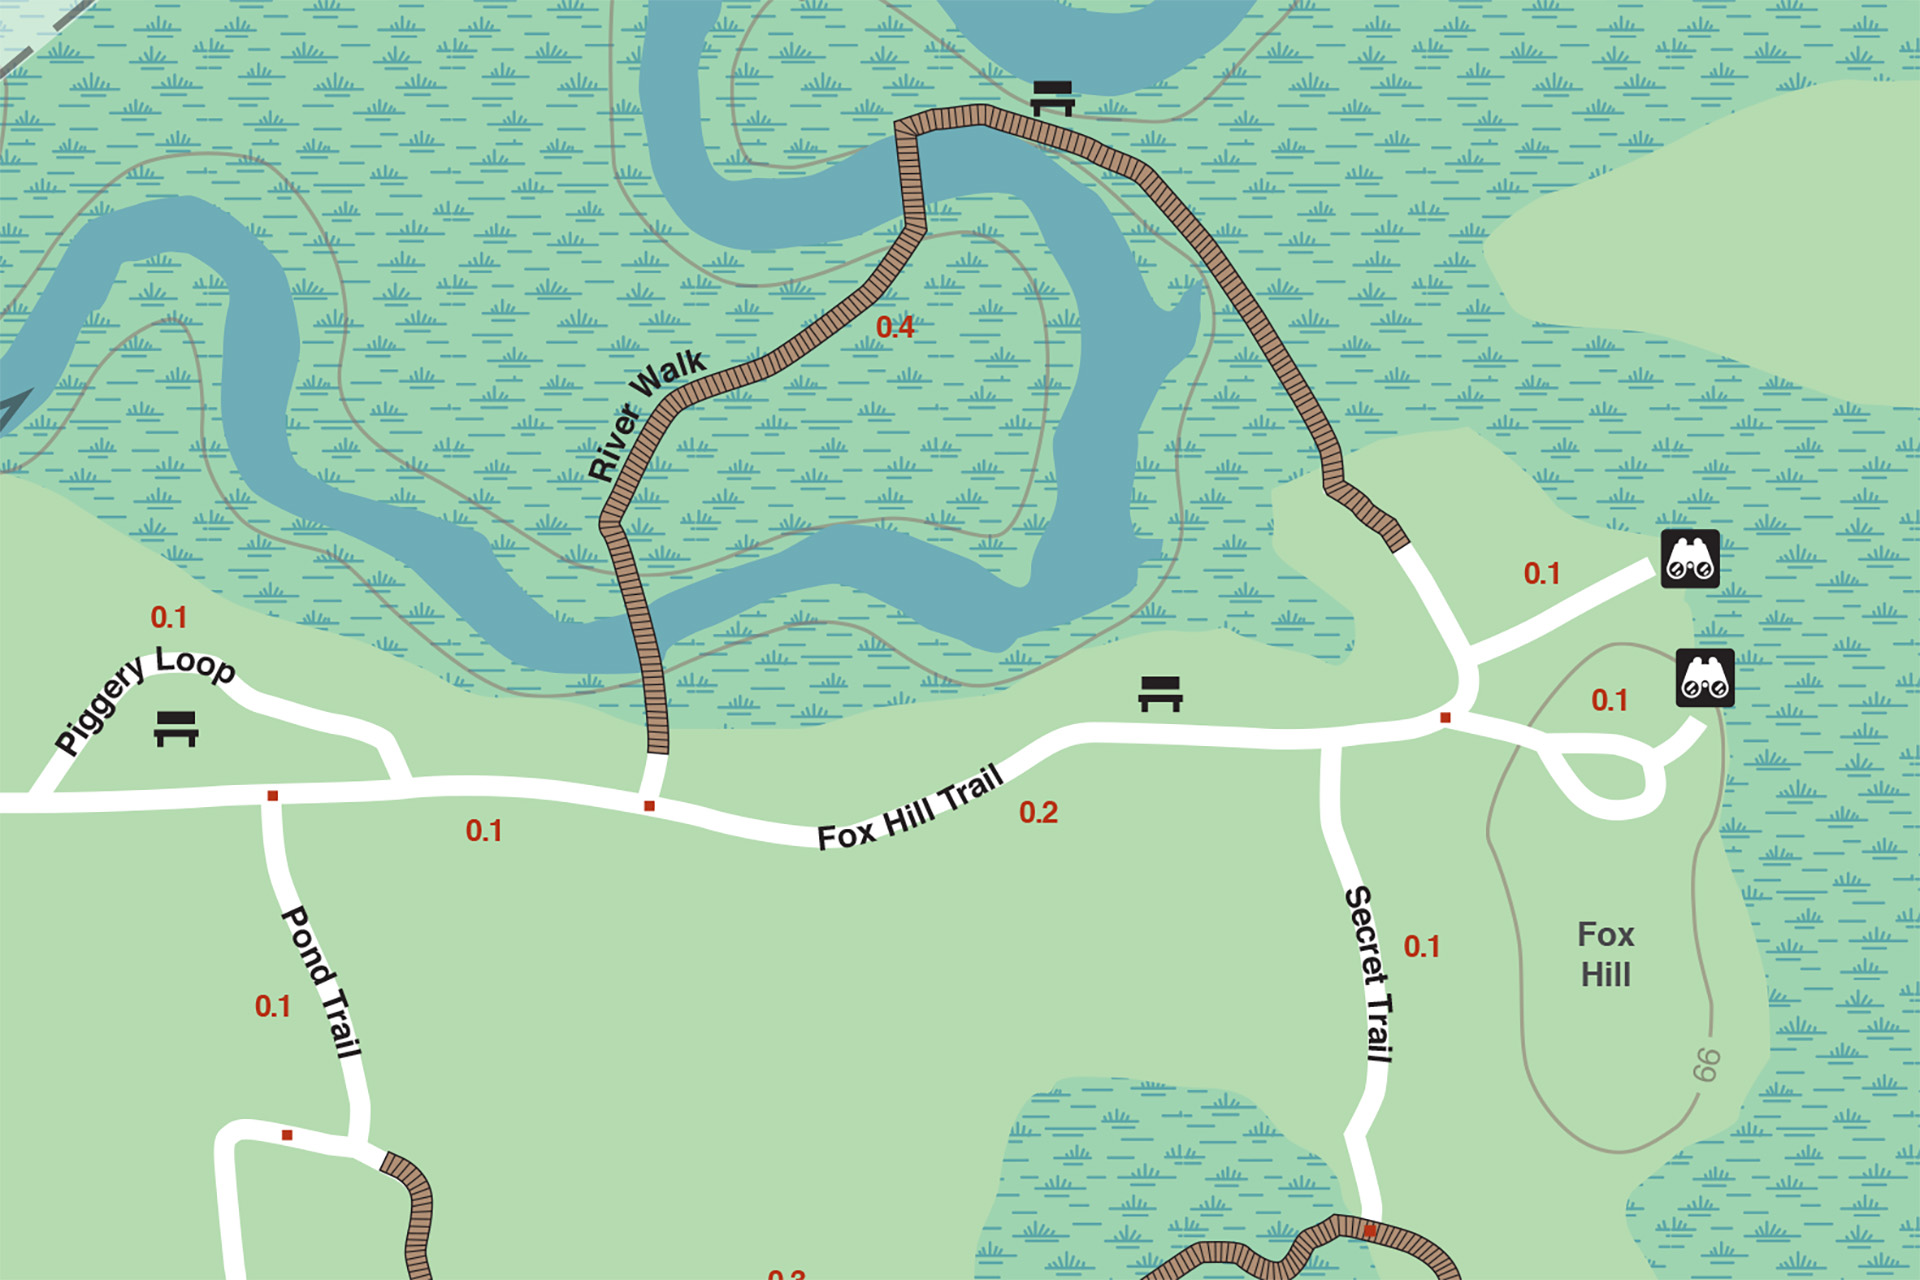 Daniel Webster Wildlife Sanctuary map highlighting trails and Fox Hill